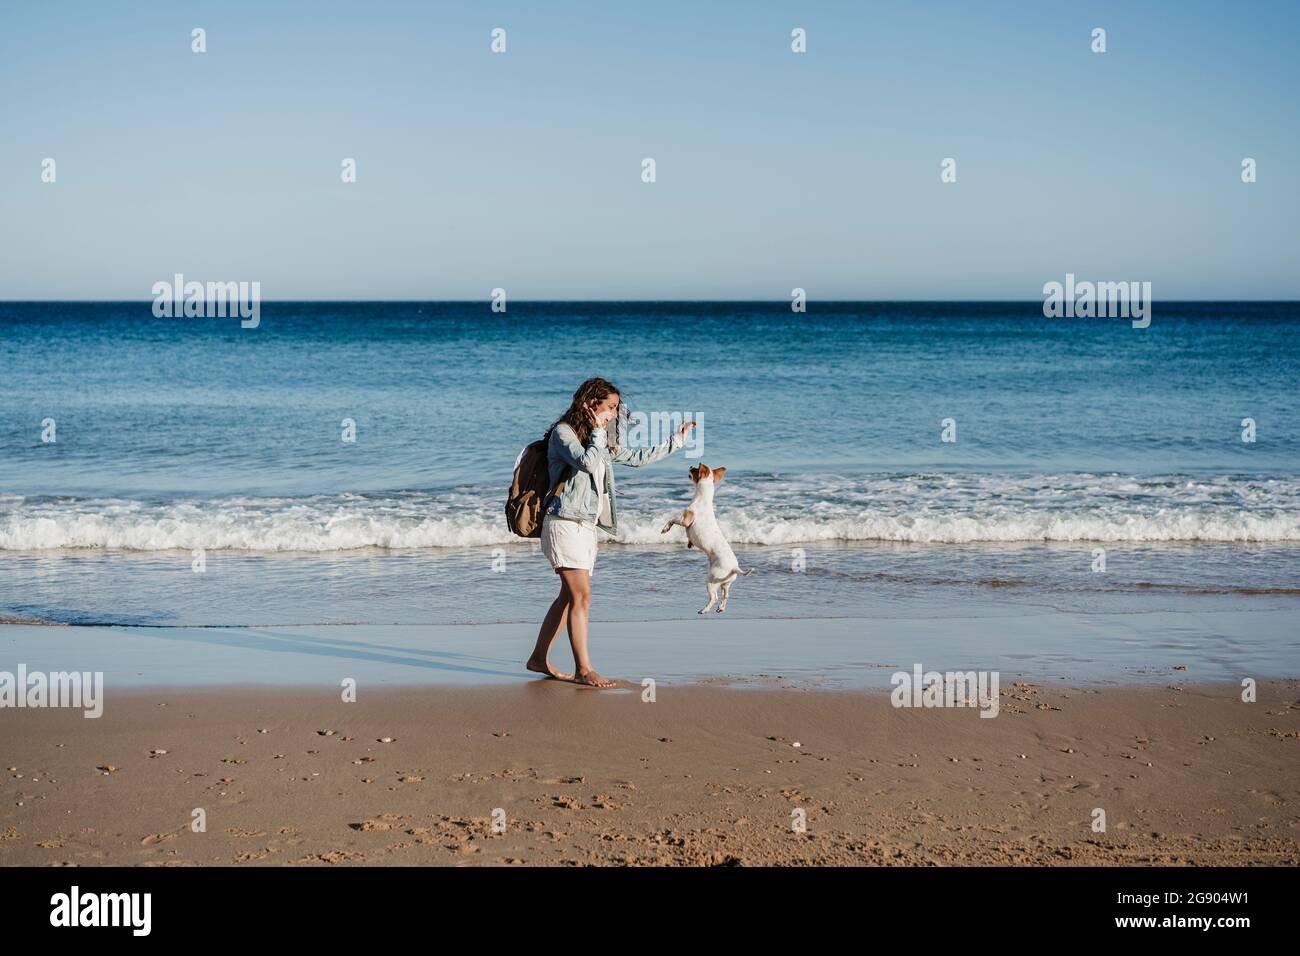 Woman playing with dog while walking at beach Stock Photo